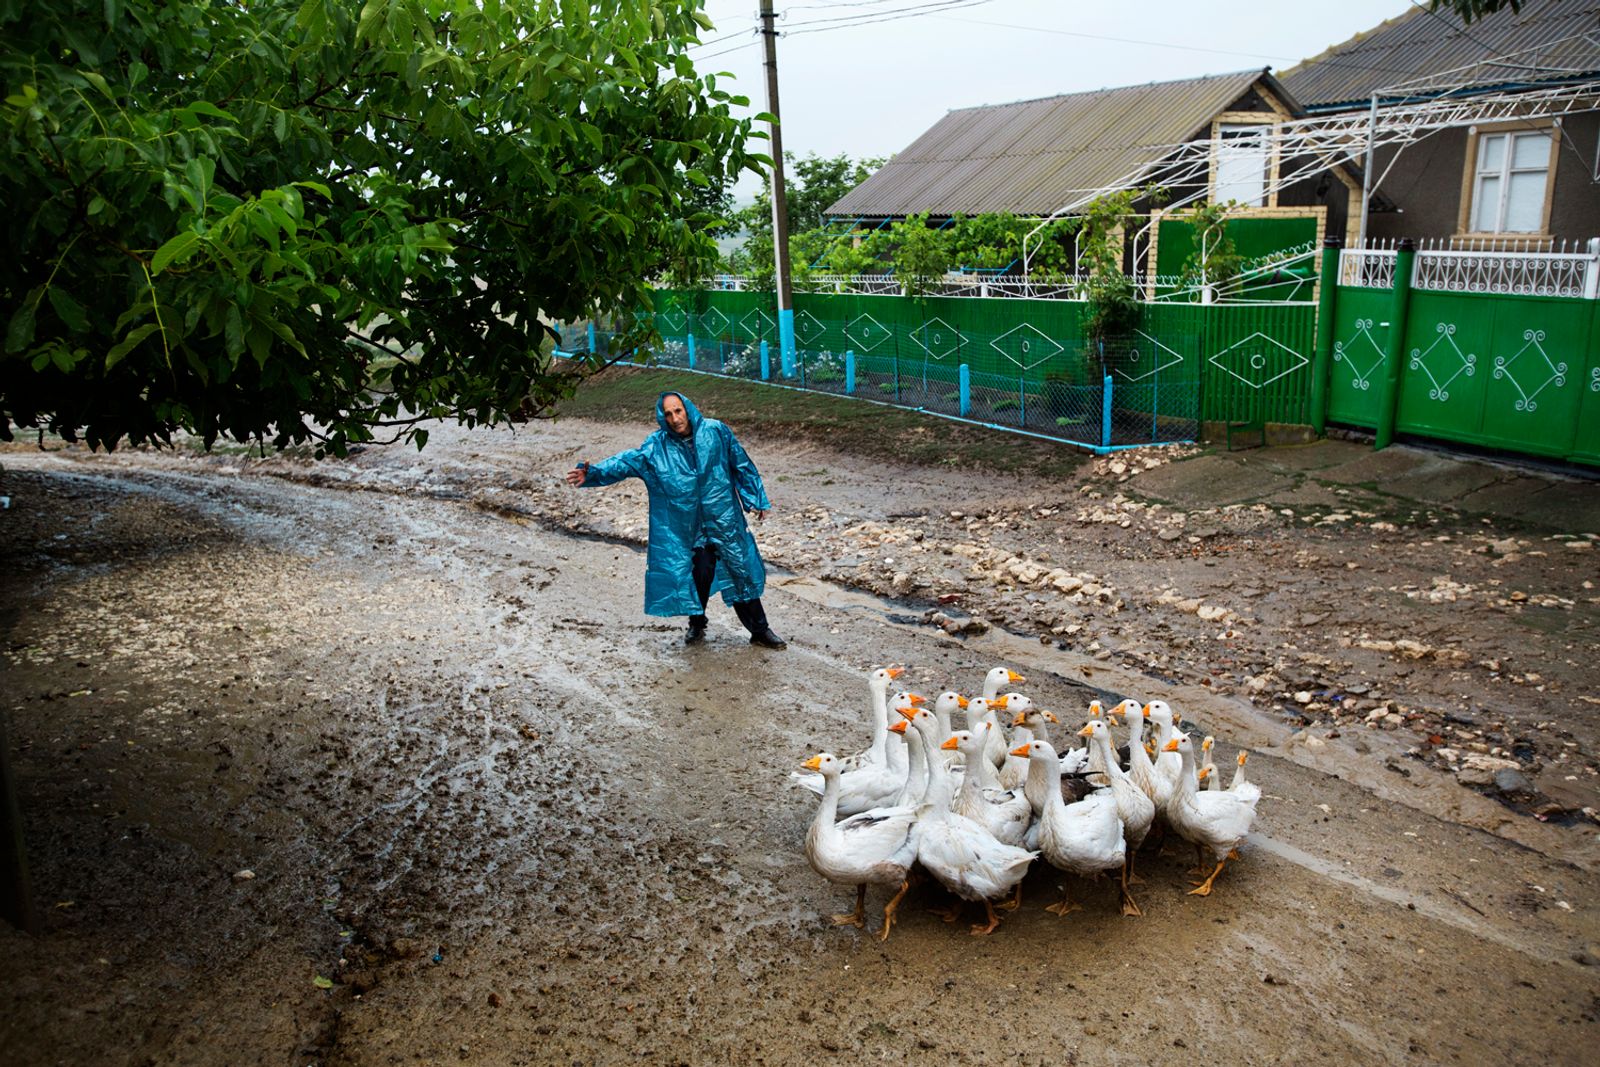 © Alessandro Vincenzi - Moldova. Beshalma, Gagauzia - July 2017A man under heavy rain is trying to direct his geese to their home.